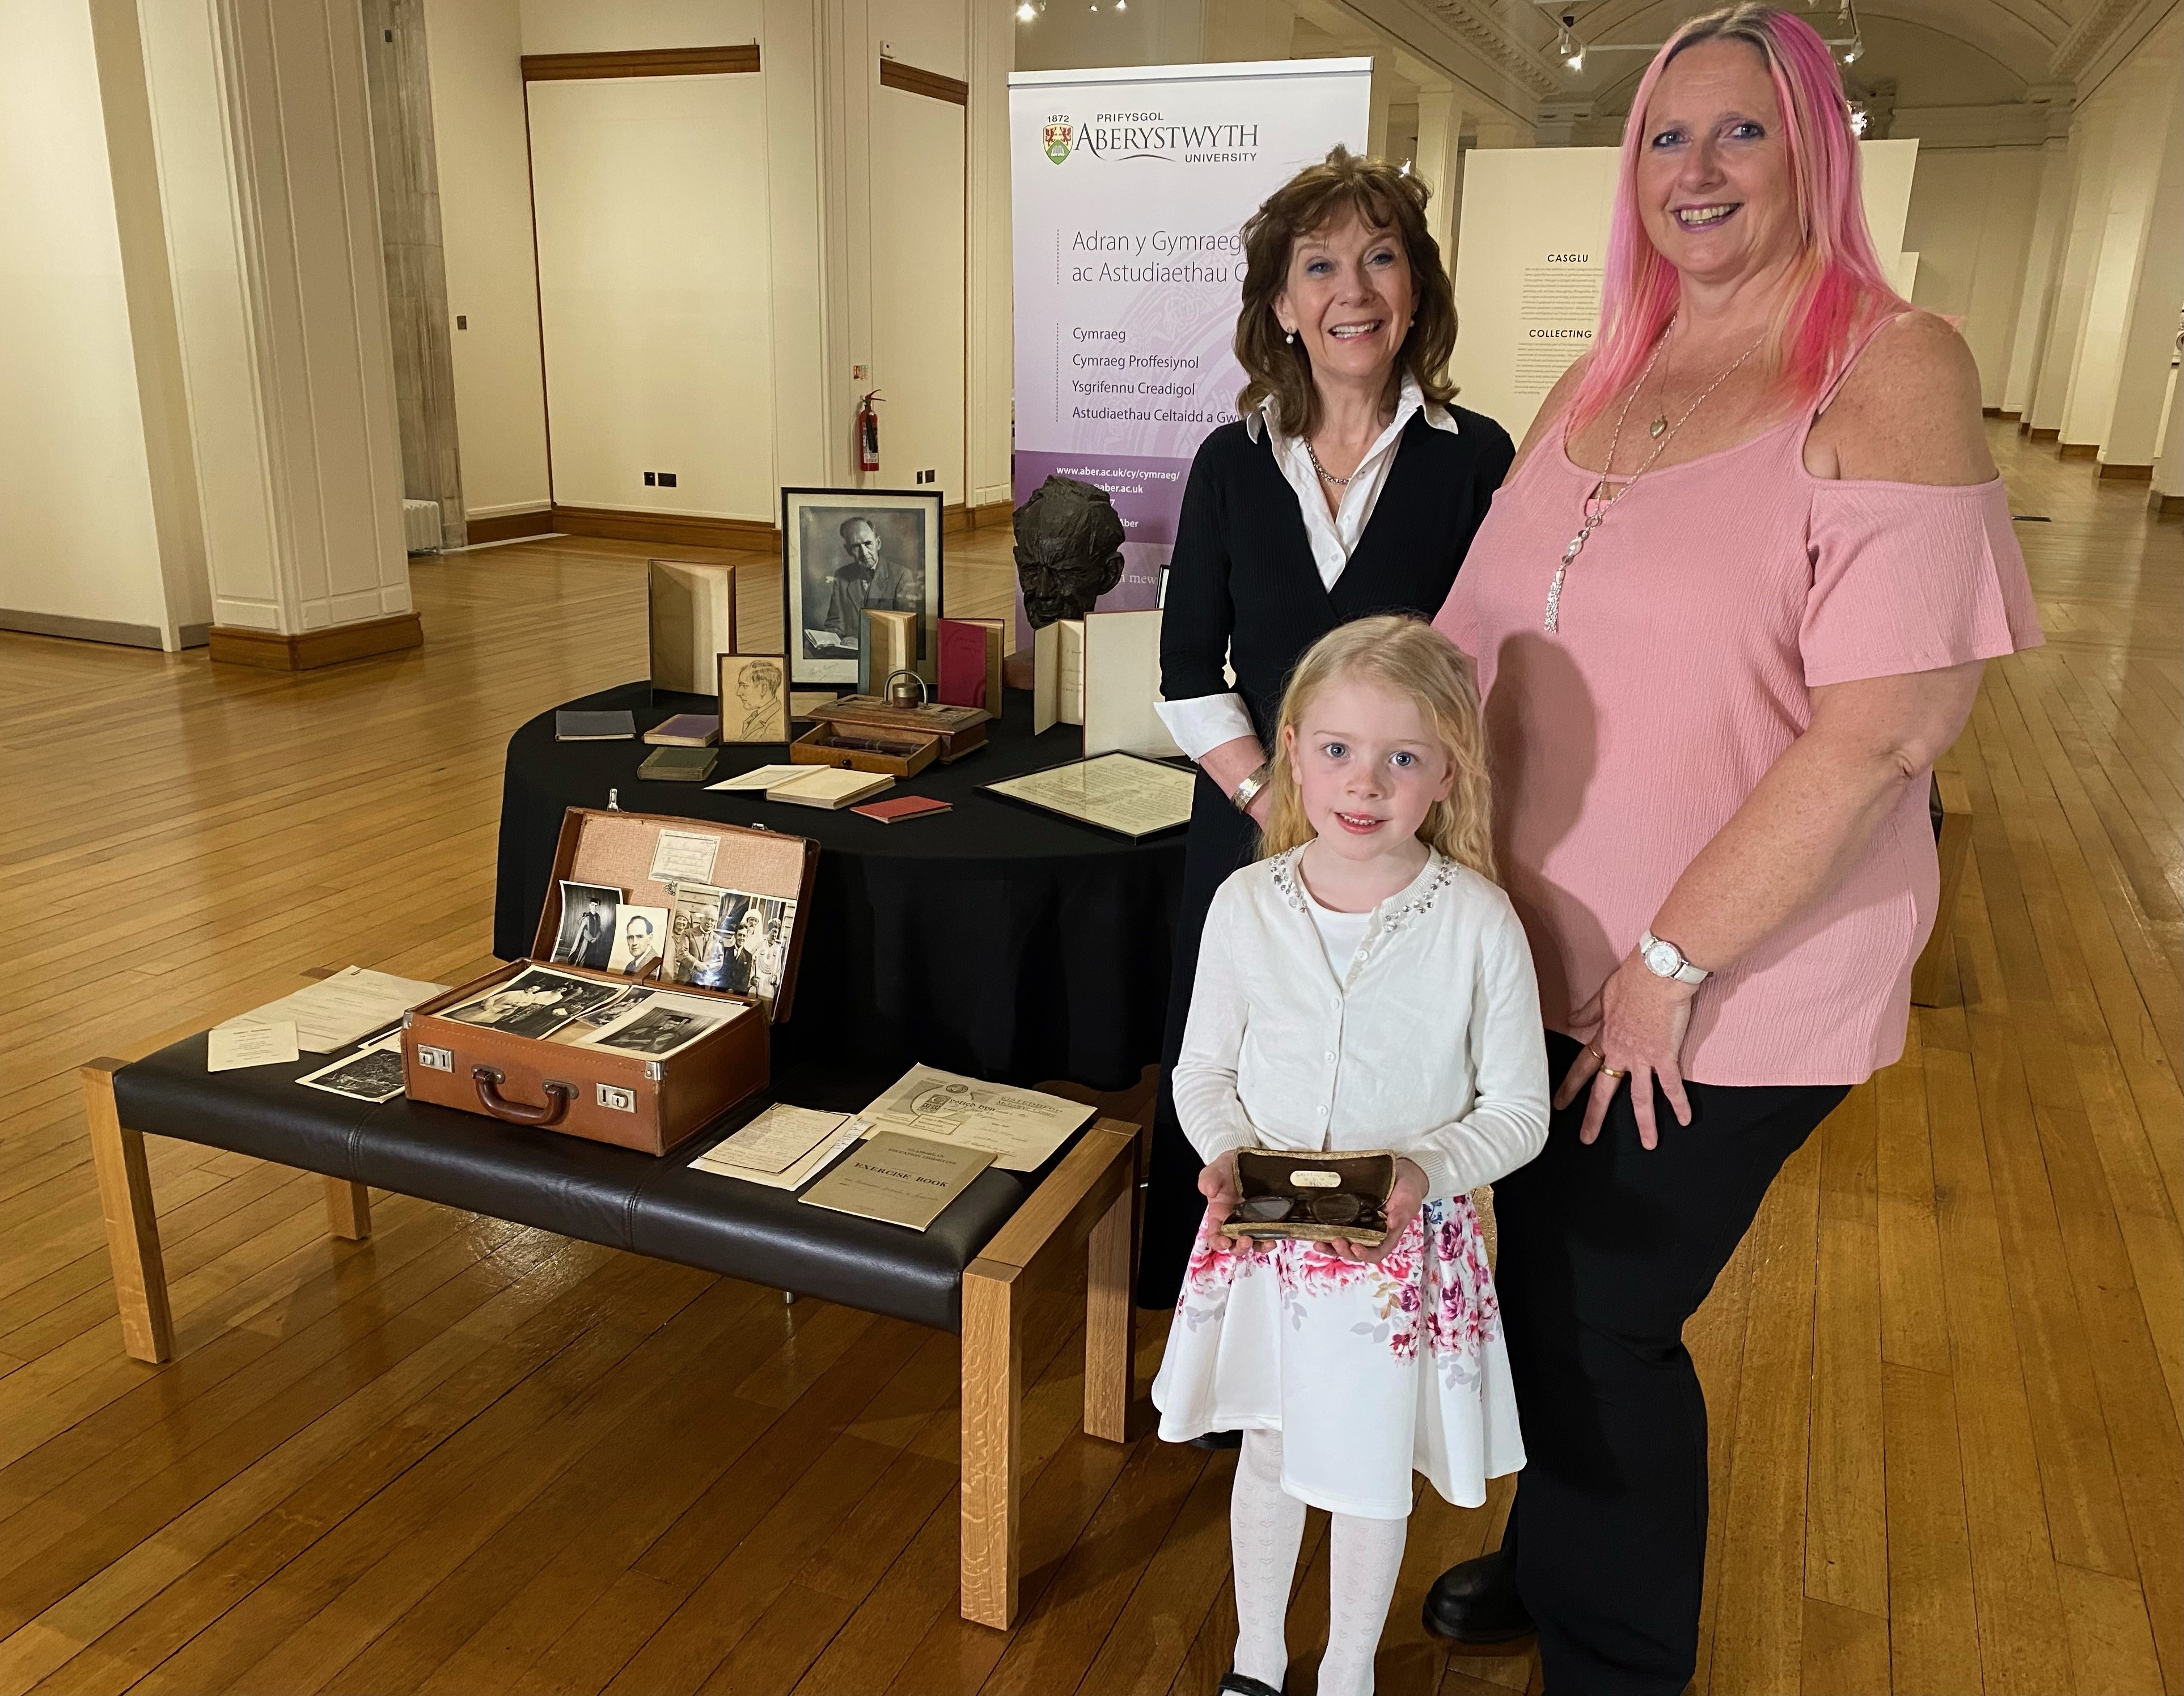 Elin Gwenallt Jones and Lowri Mair Saunders, Gwenallt’s granddaughter and great great granddaughter, with Professor Mererid Hopwood from the Department of Welsh and Celtic Studies (left) marking the presentation of objects and manuscripts that belonged to Gwenallt to the Department and the National Library of Wales.